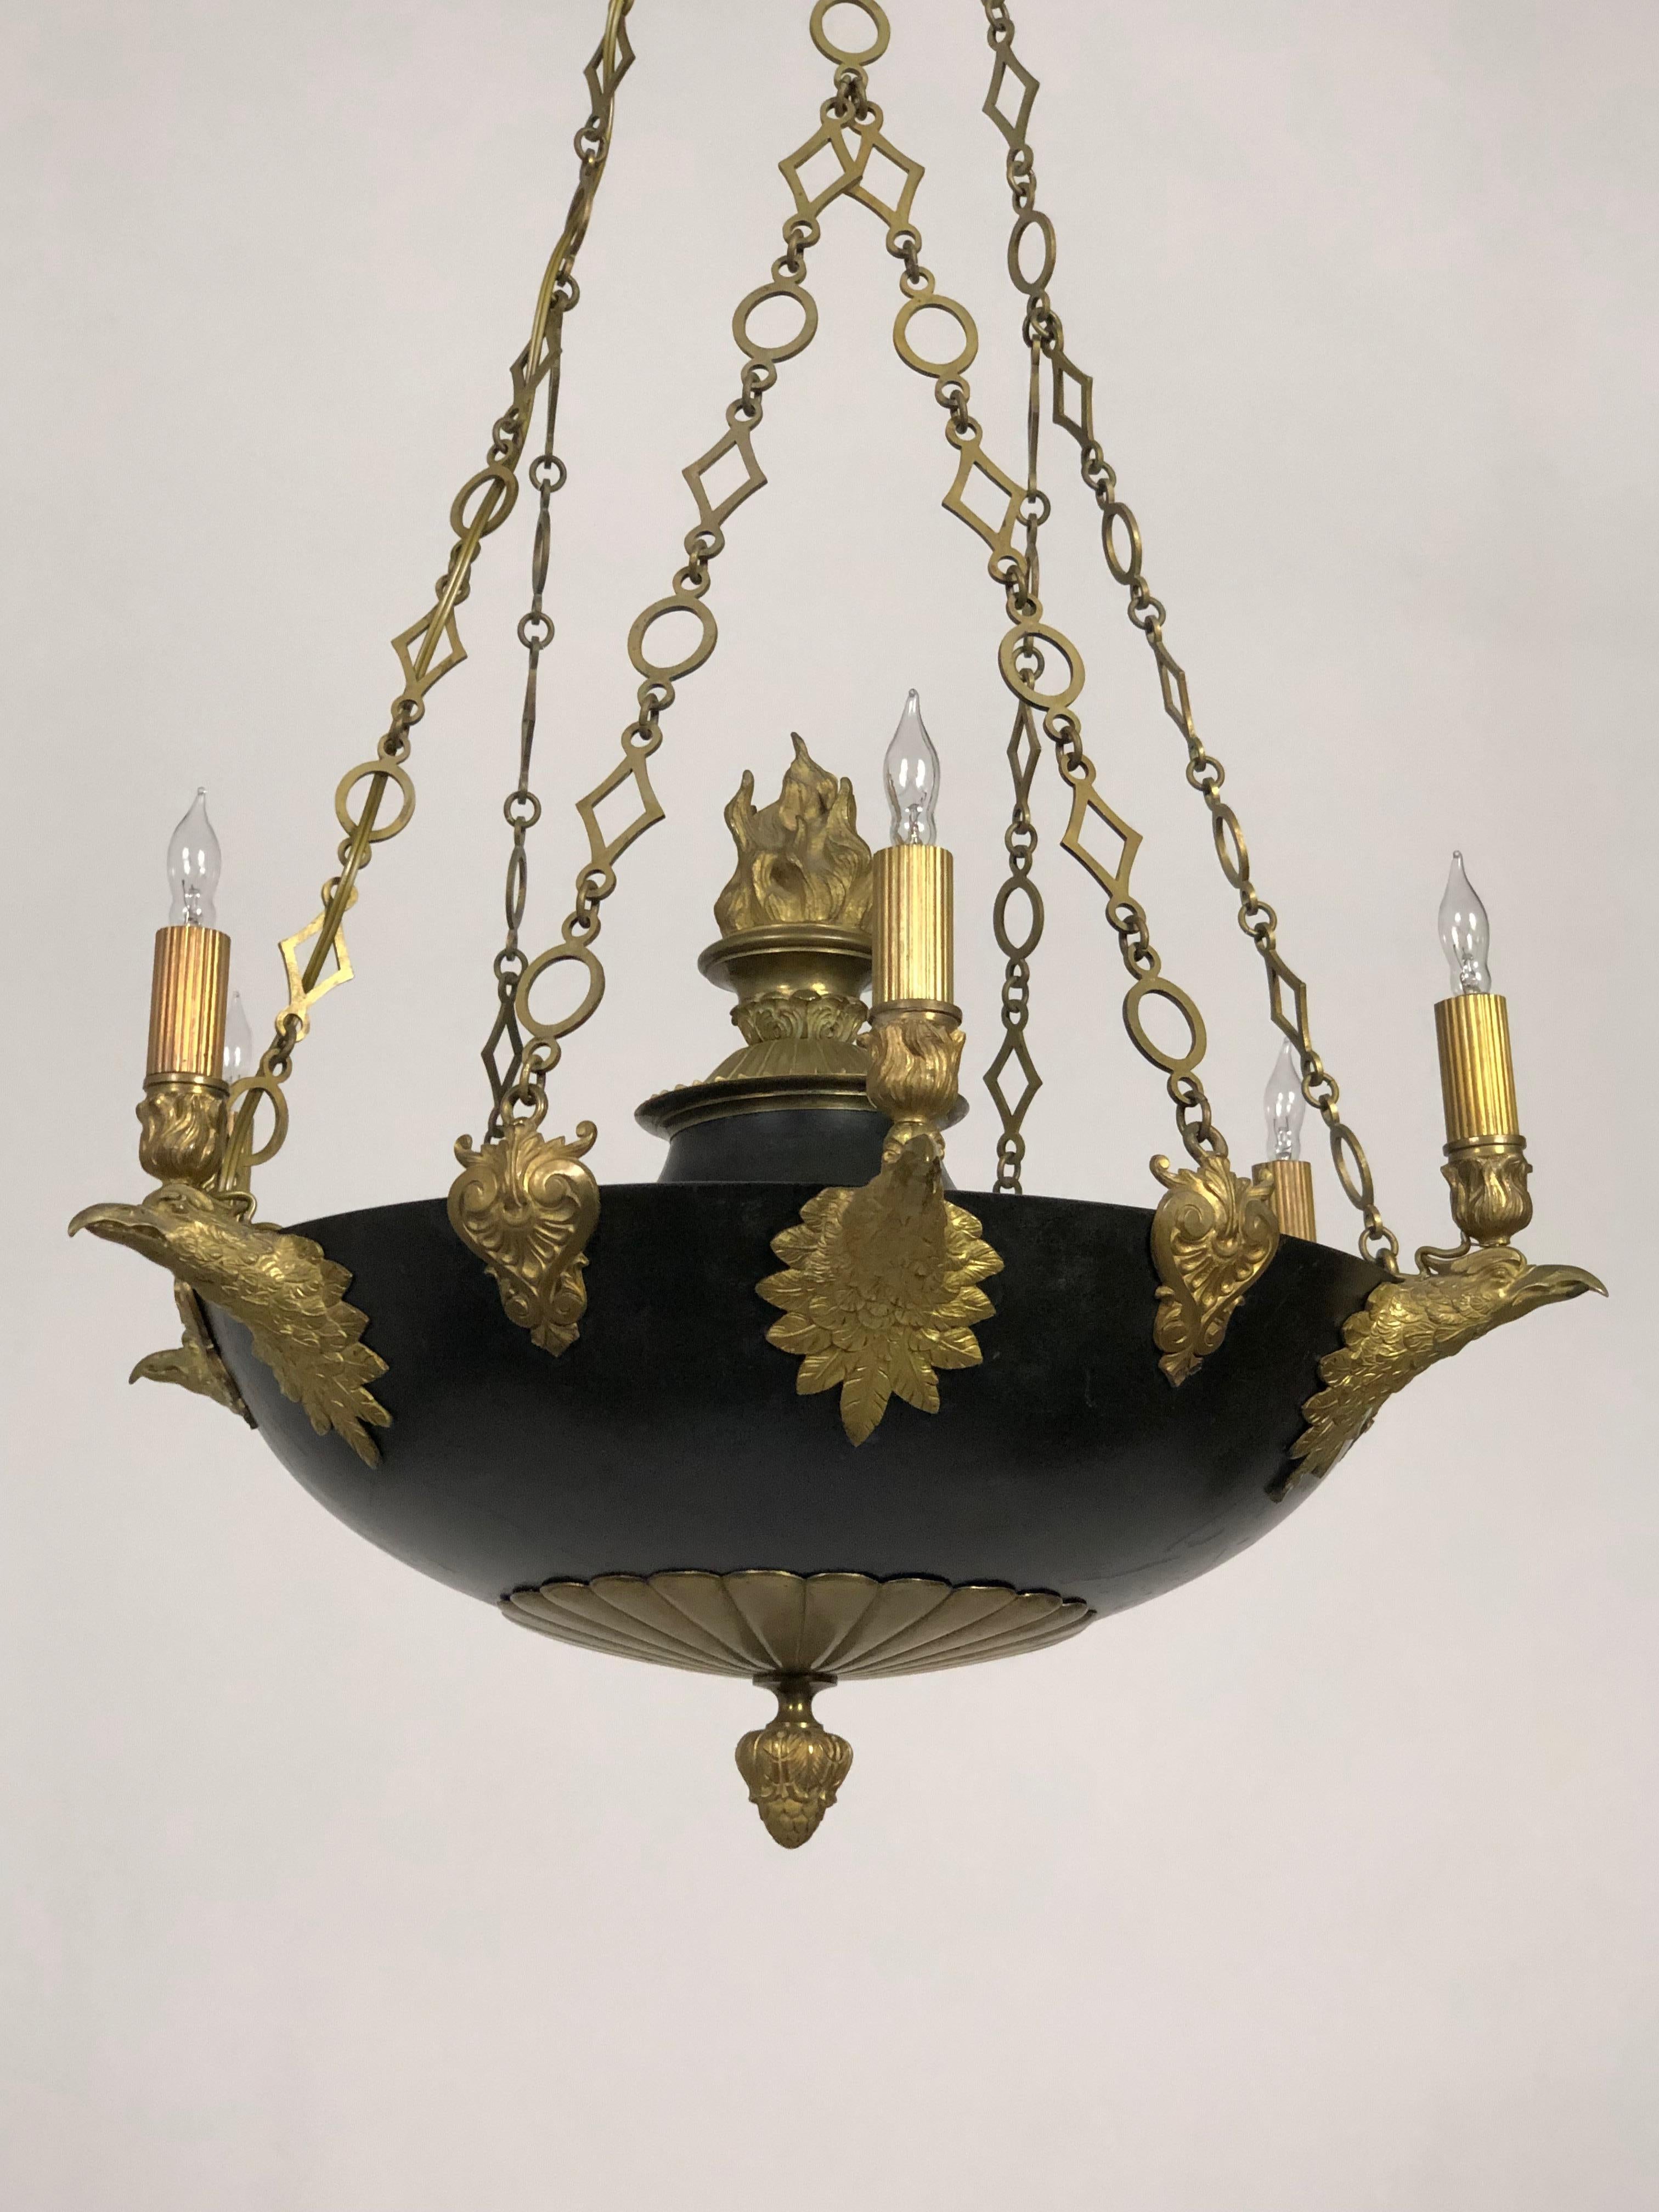 An Empire-style, black and gold chandelier made in Sweden circa 1830. In a bowl-form with 5 candle-style lights with finely cast, eagle head mounts. The chain, with circle and diamond links, adds a pleasing geometry to the piece. It's further